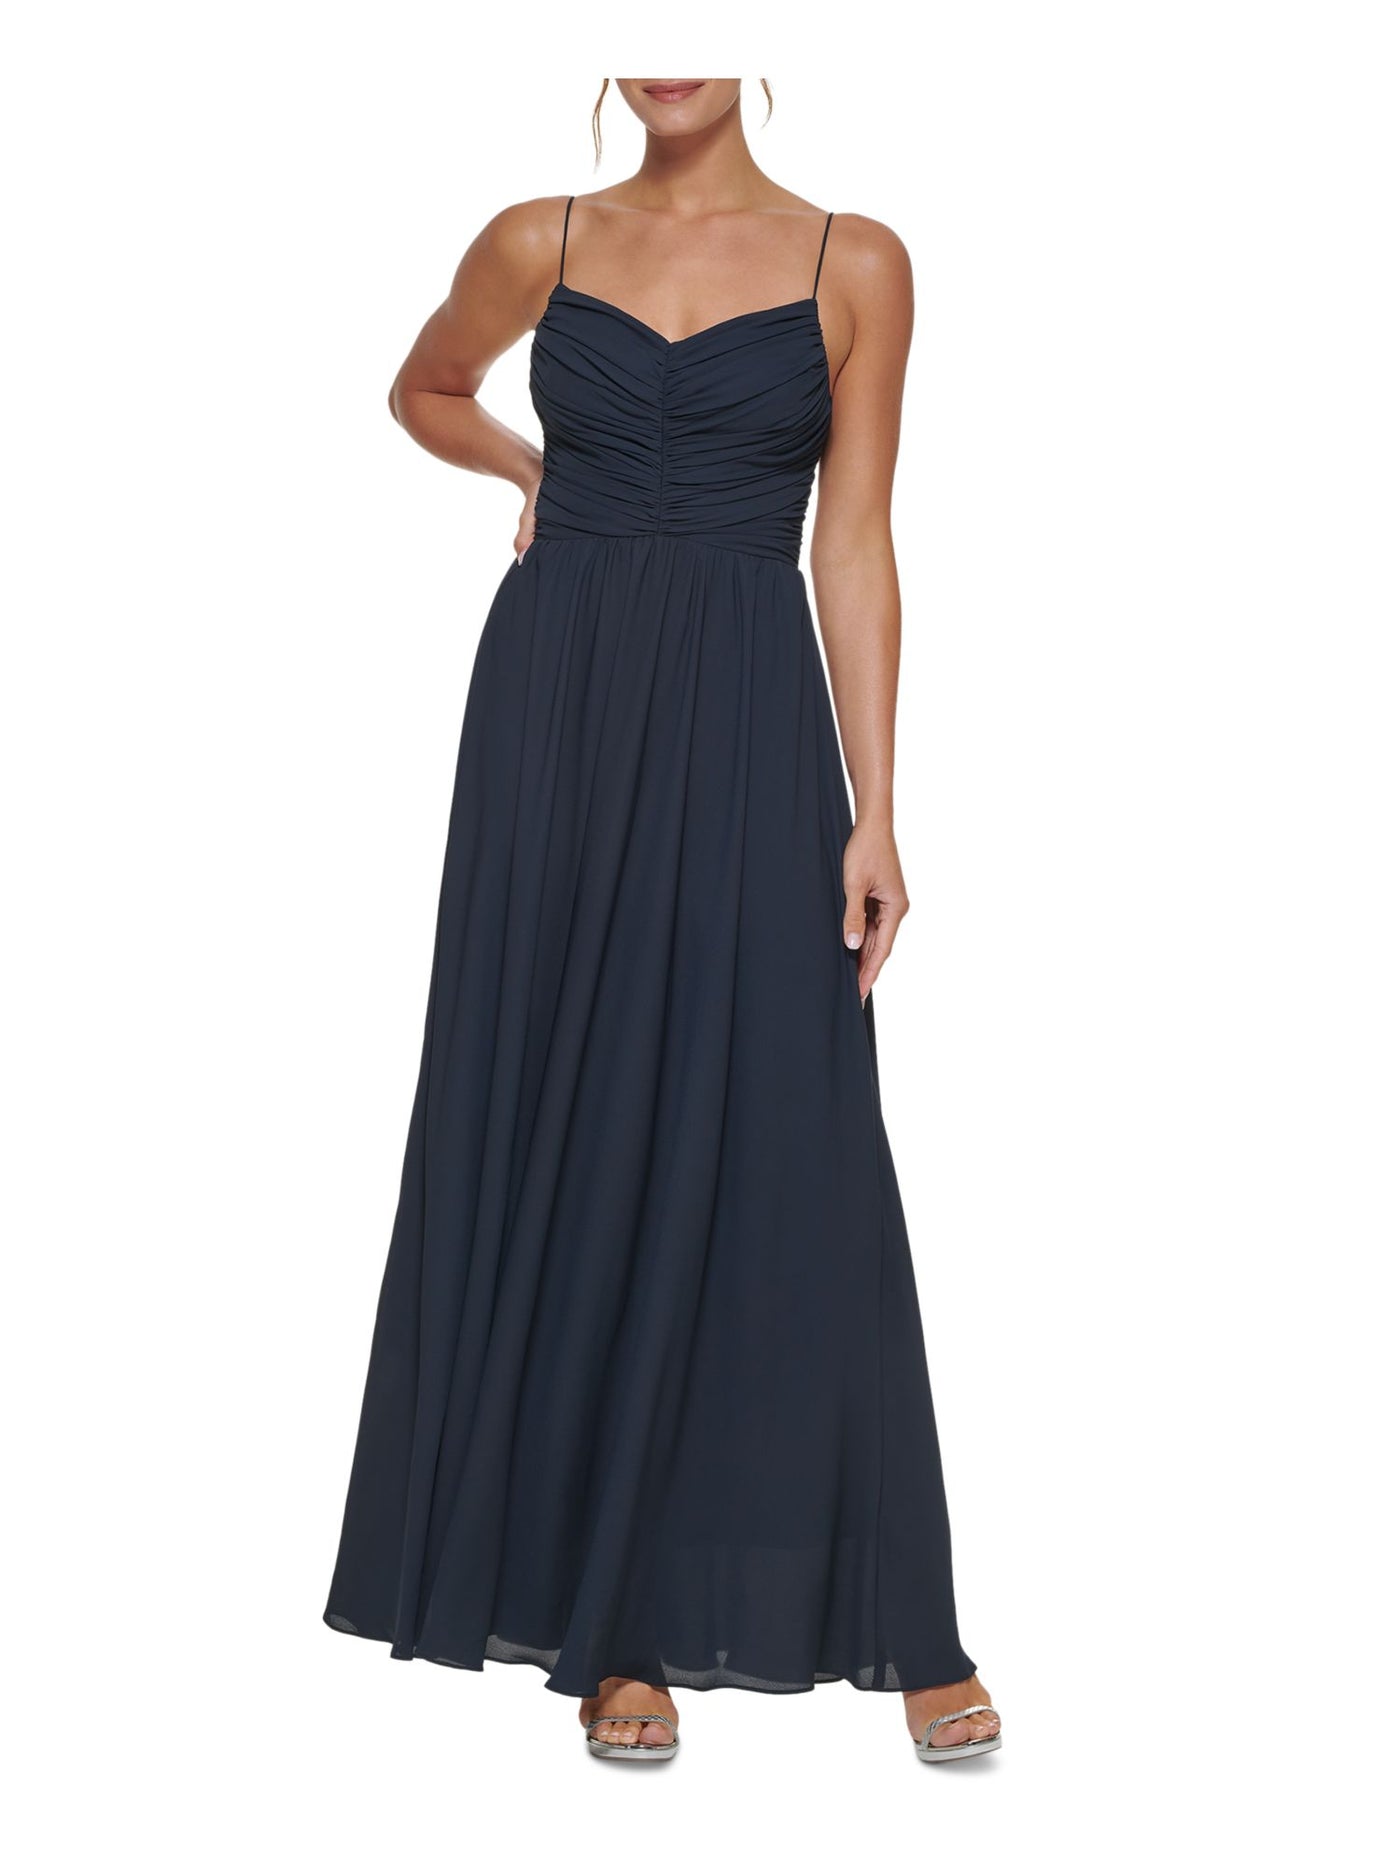 DKNY Womens Navy Ruched Zippered Lined Spaghetti Strap V Neck Full-Length Formal Gown Dress 14